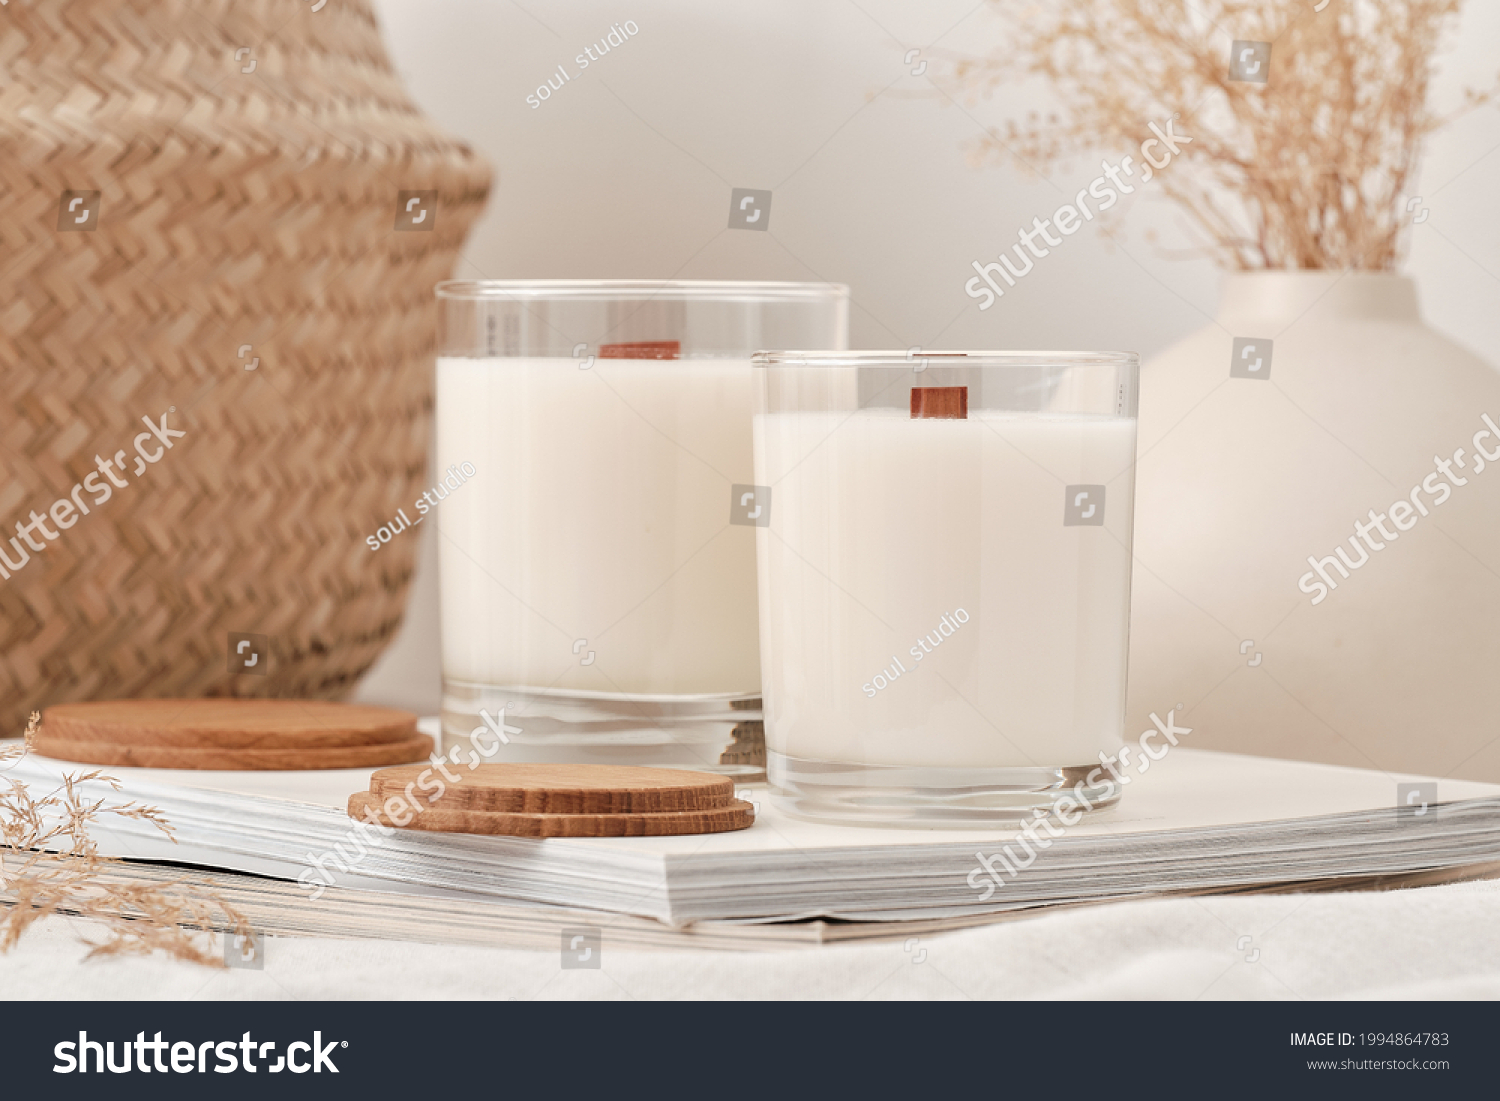 Handmade scented candles in a glass with a wooden lid. Soy wax candles with a wooden wick. #1994864783